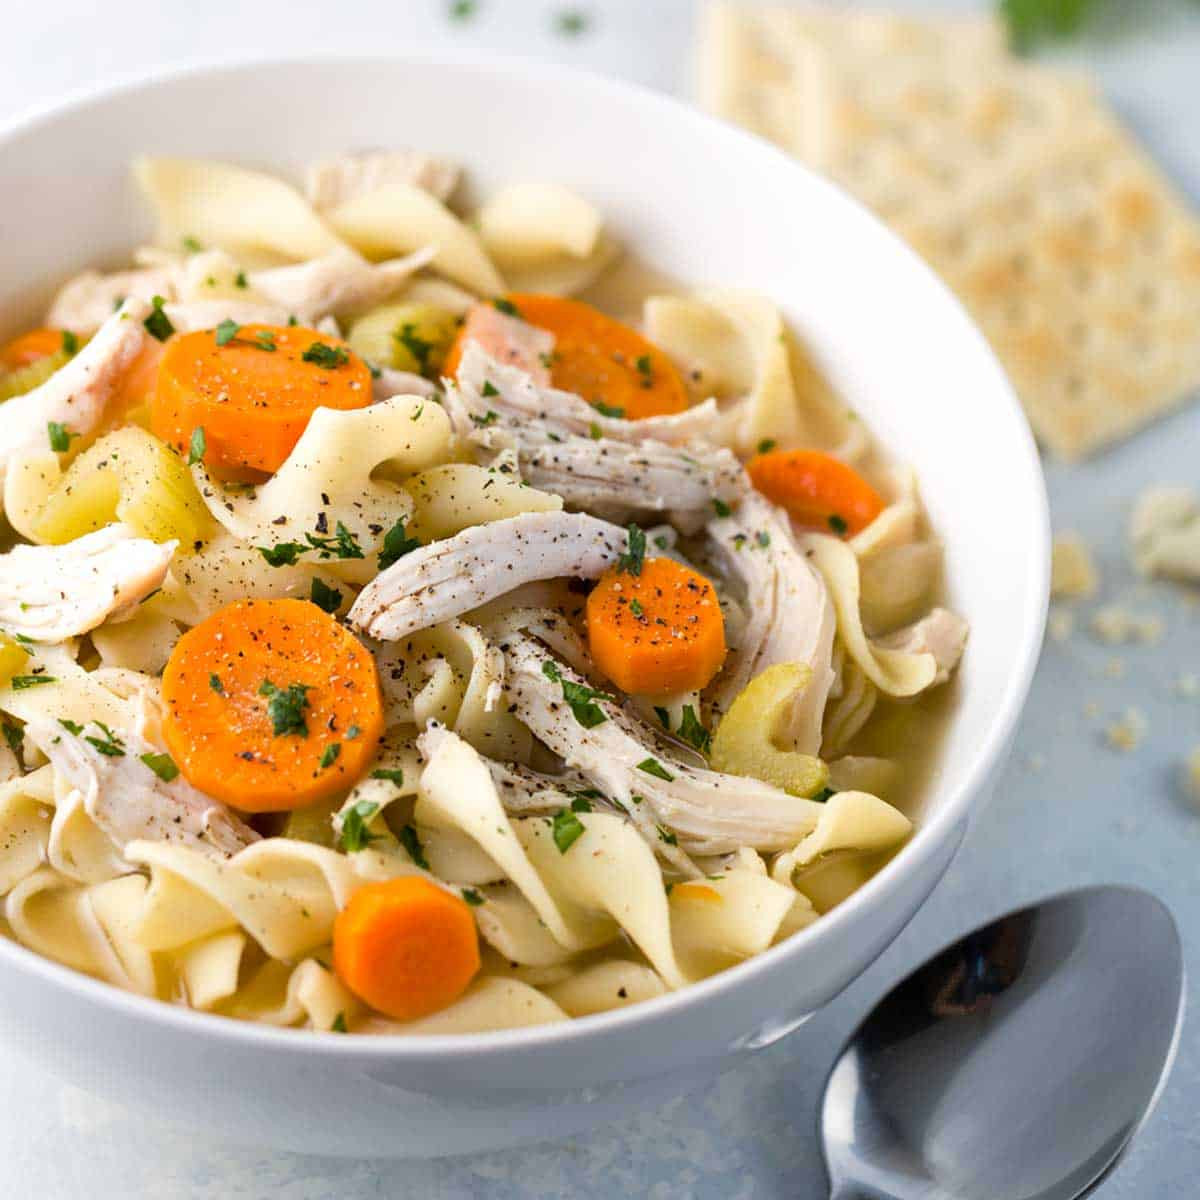 Homemade Chicken Noodle soup Slow Cooker Awesome Easy Slow Cooker Chicken Noodle soup Recipe